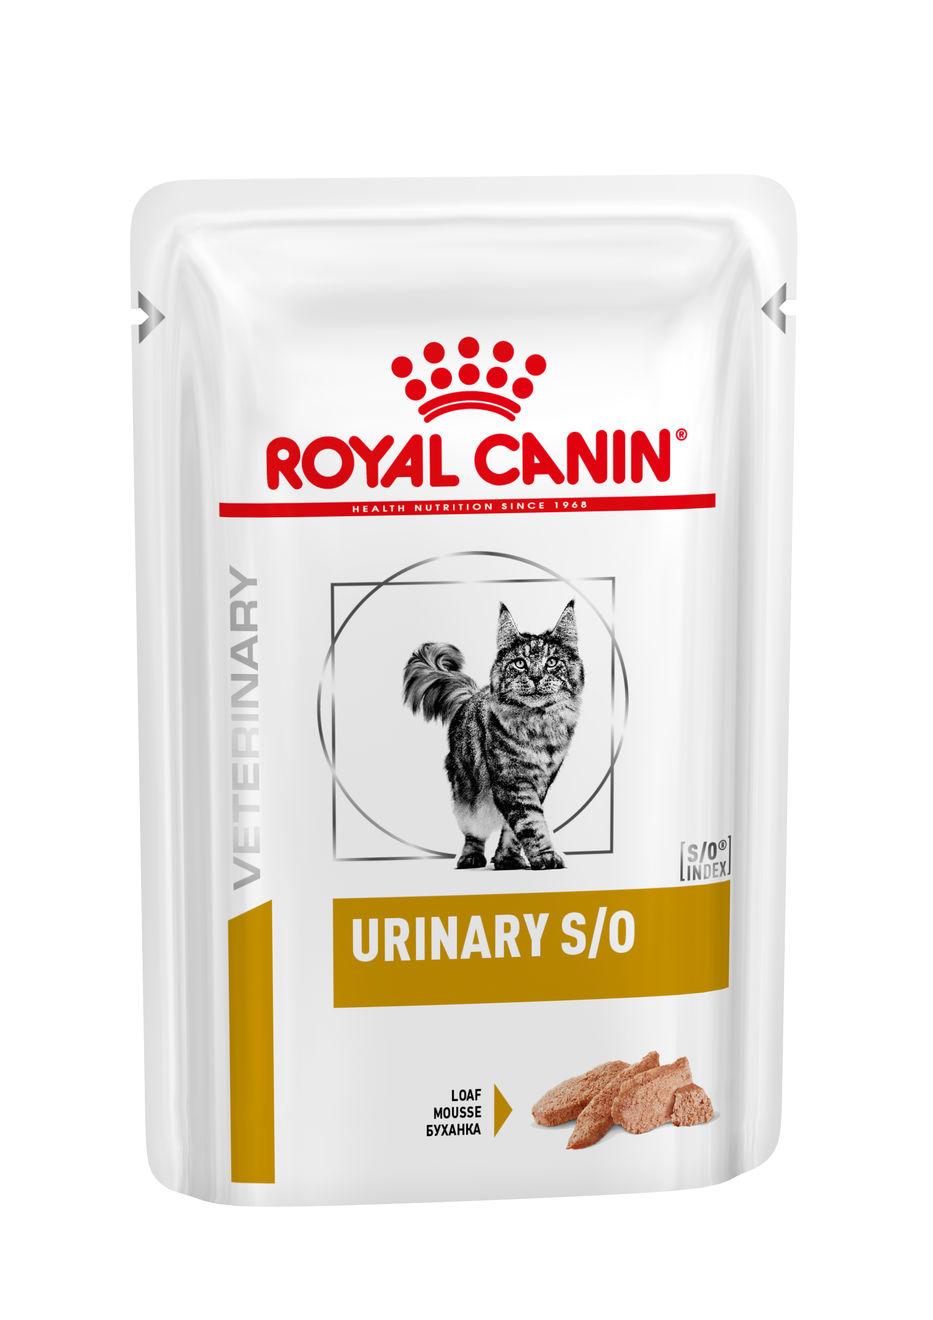 Royal Canin Urinary S/O Kat - pouches (loaf) 12x85g